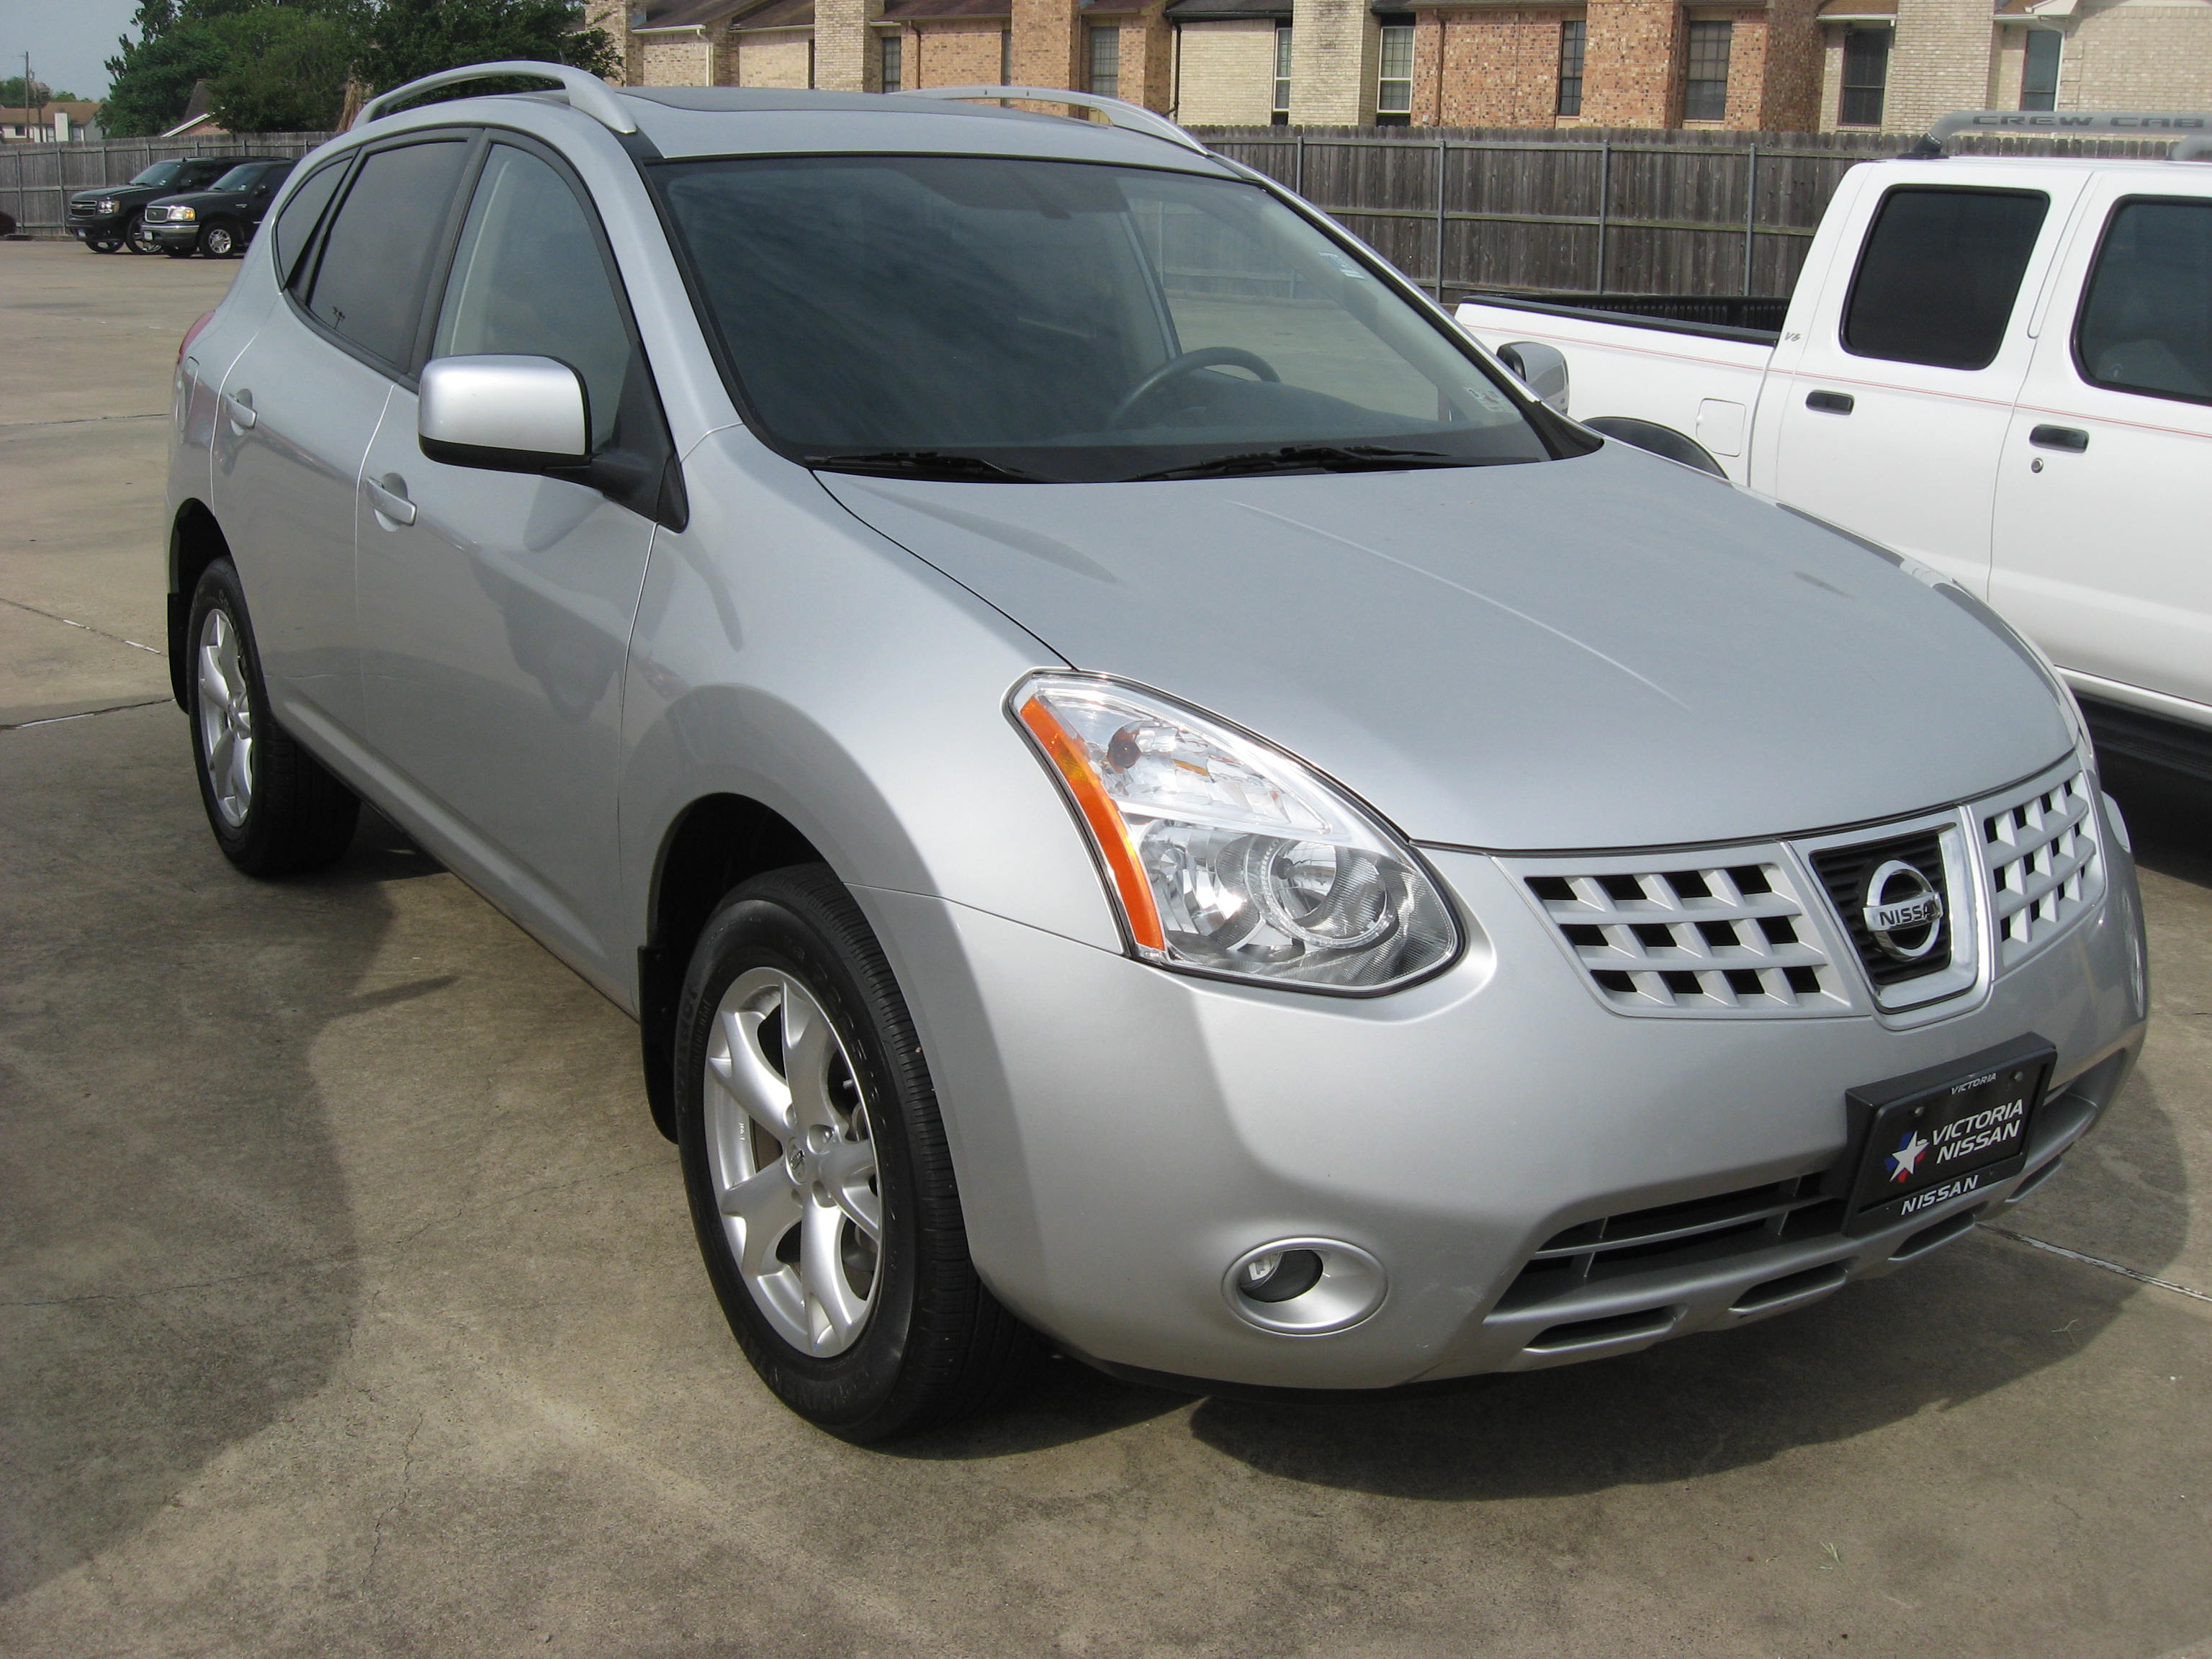 Certified 2008 Nissan Rogue Premium in Silver Ice now at Victoria Nissan |  Victoria Nissan News